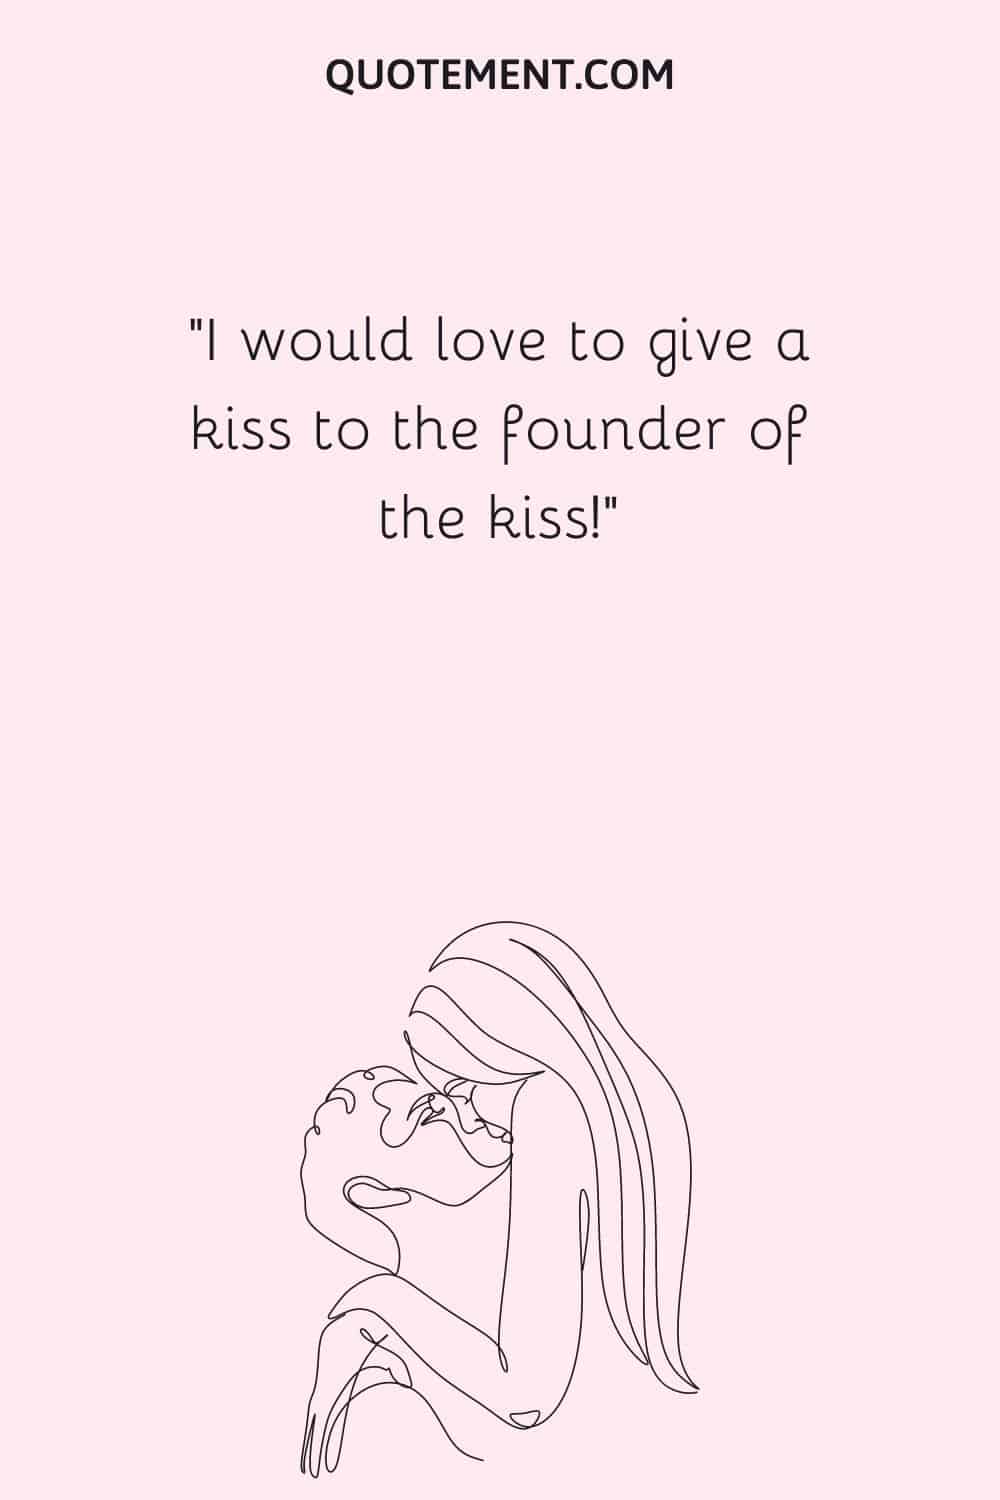 I would love to give a kiss to the founder of the kiss!